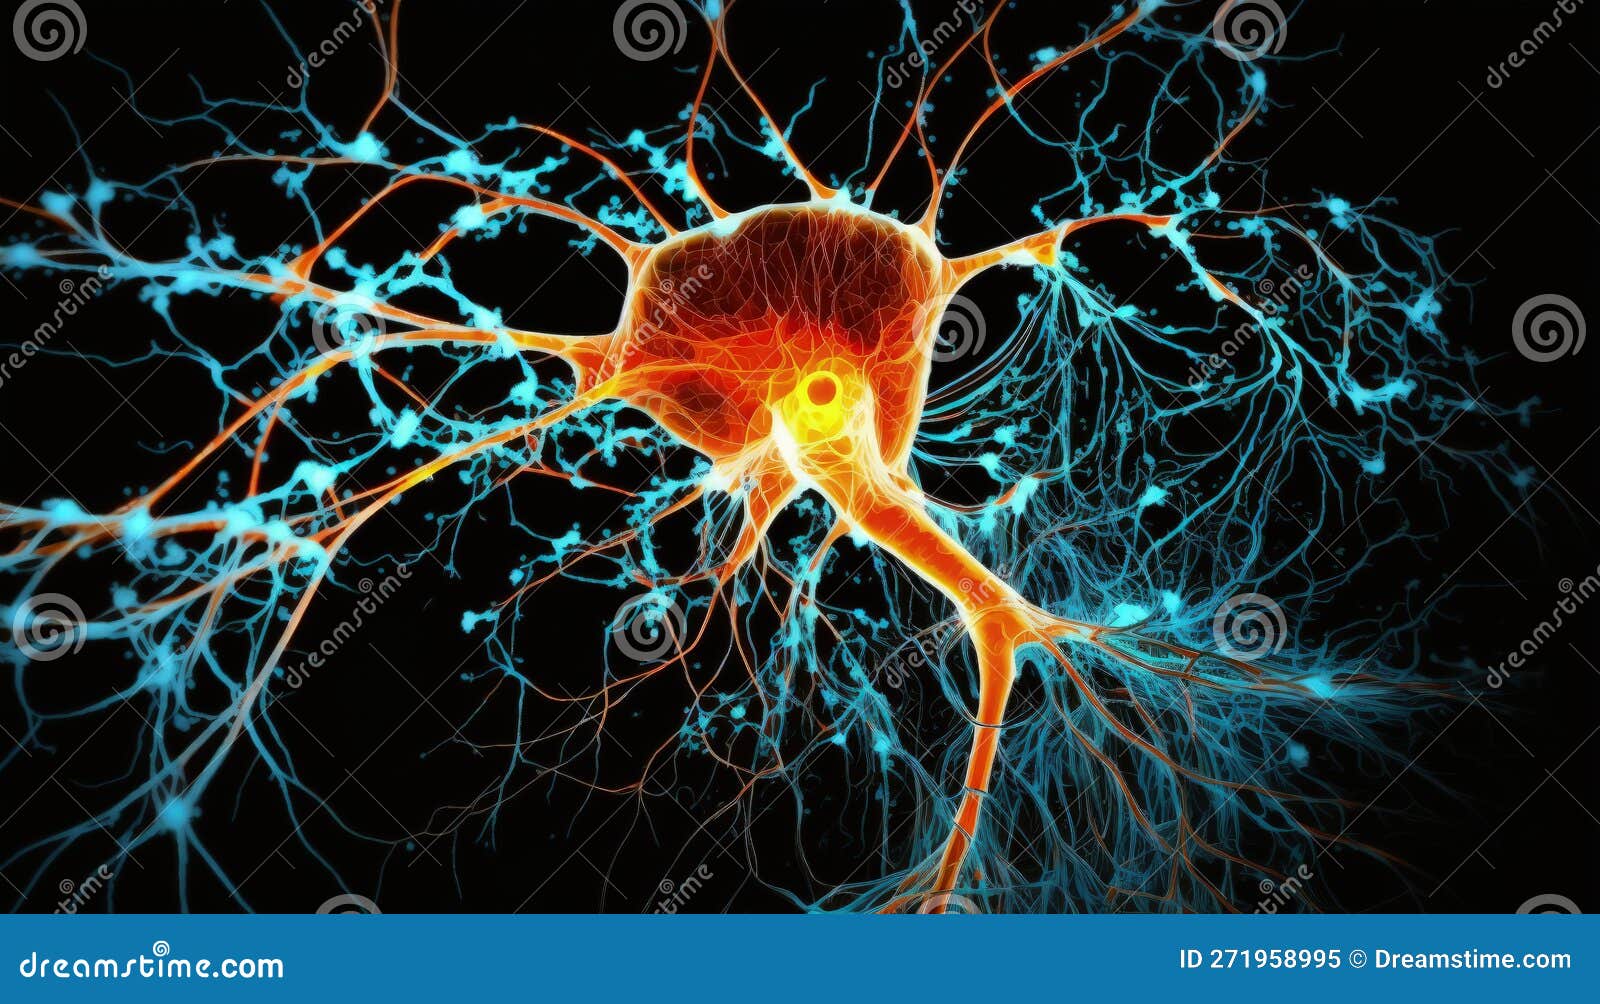 the power of connections: understanding brain neuronal pathways background